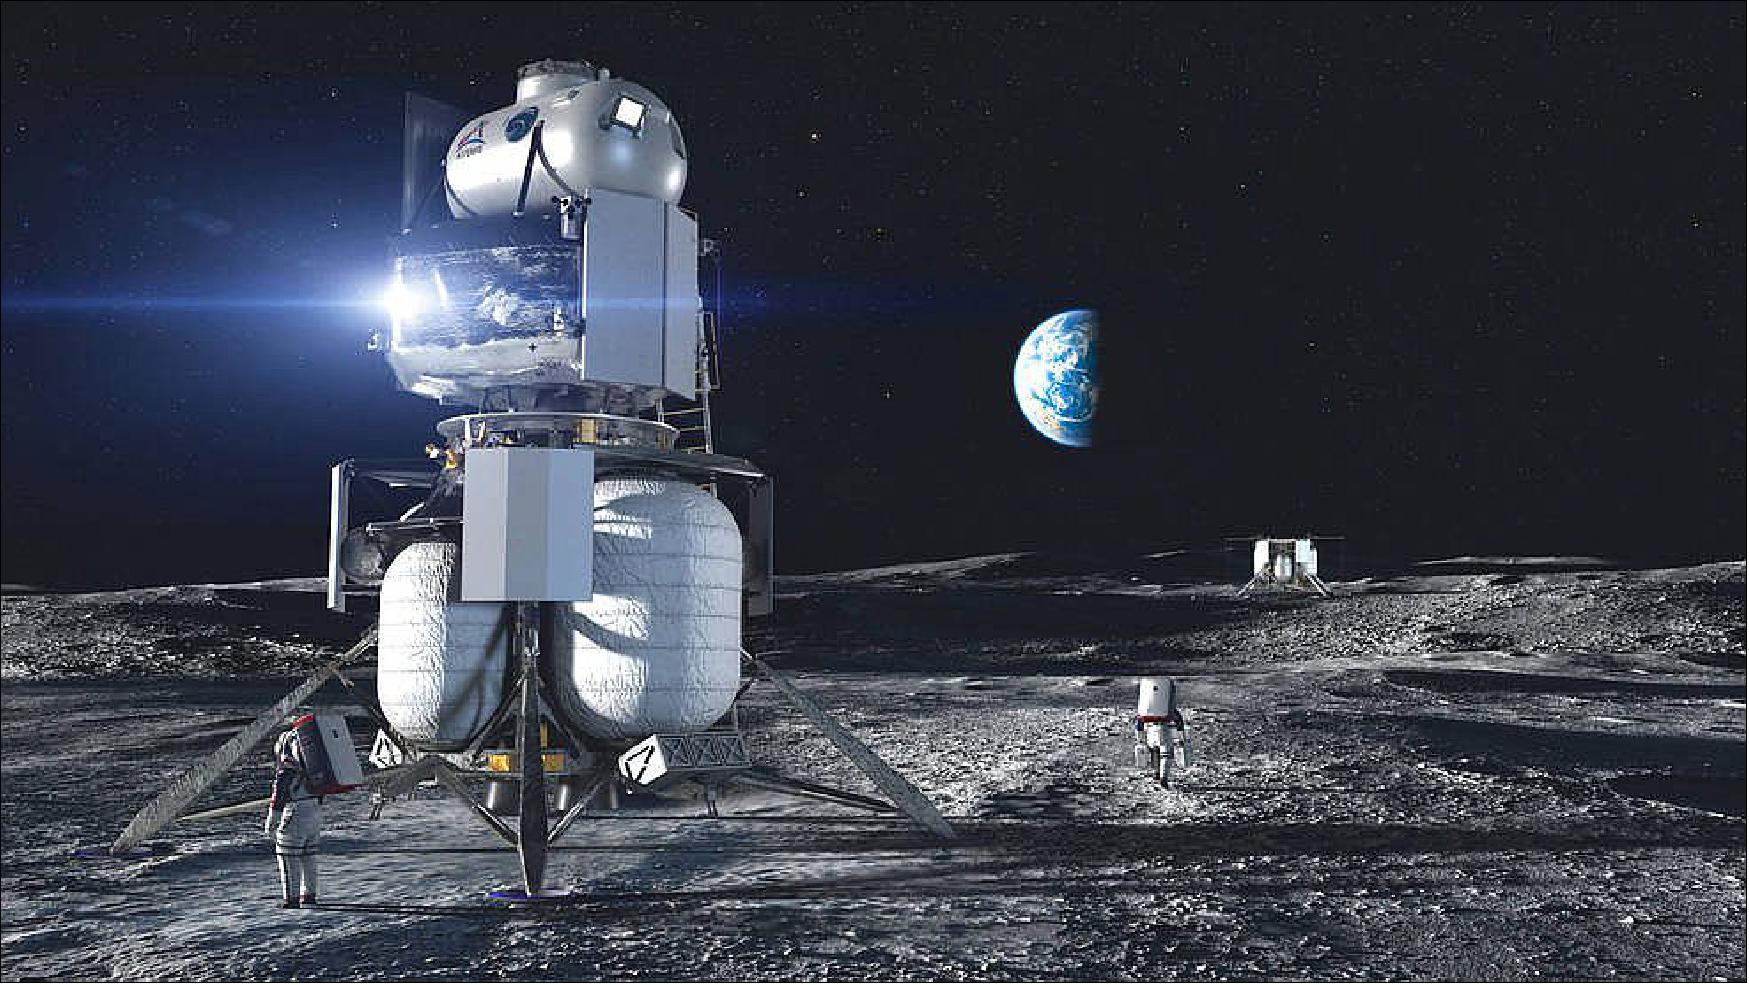 Figure 40: Artist concept of the Blue Origin National Team crewed lander on the surface of the Moon ( image credit: Blue Origin)